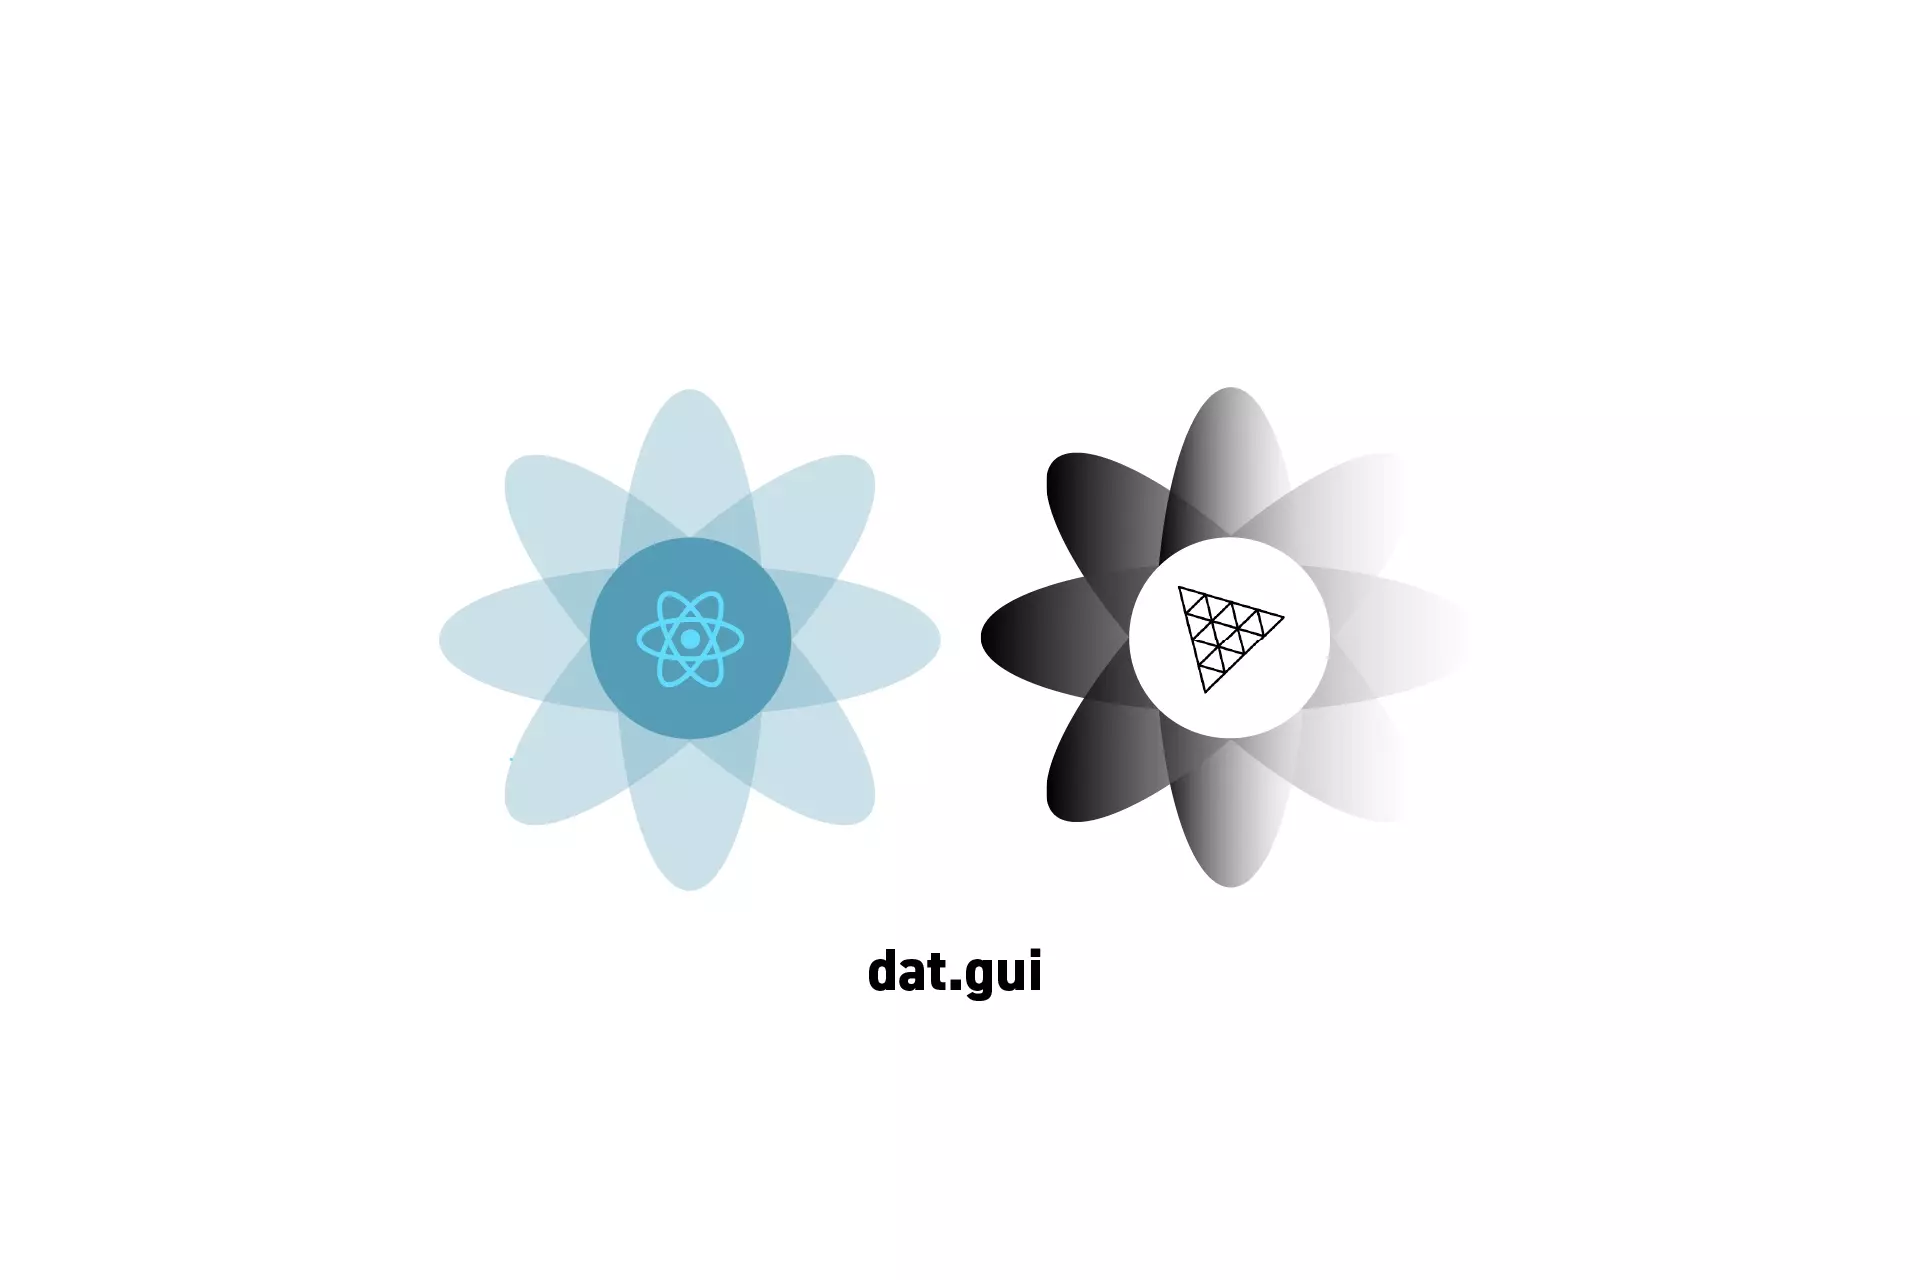 Two flowers that represent ReactJS and ThreeJS side by side. Beneath them sits the text "dat.gui."